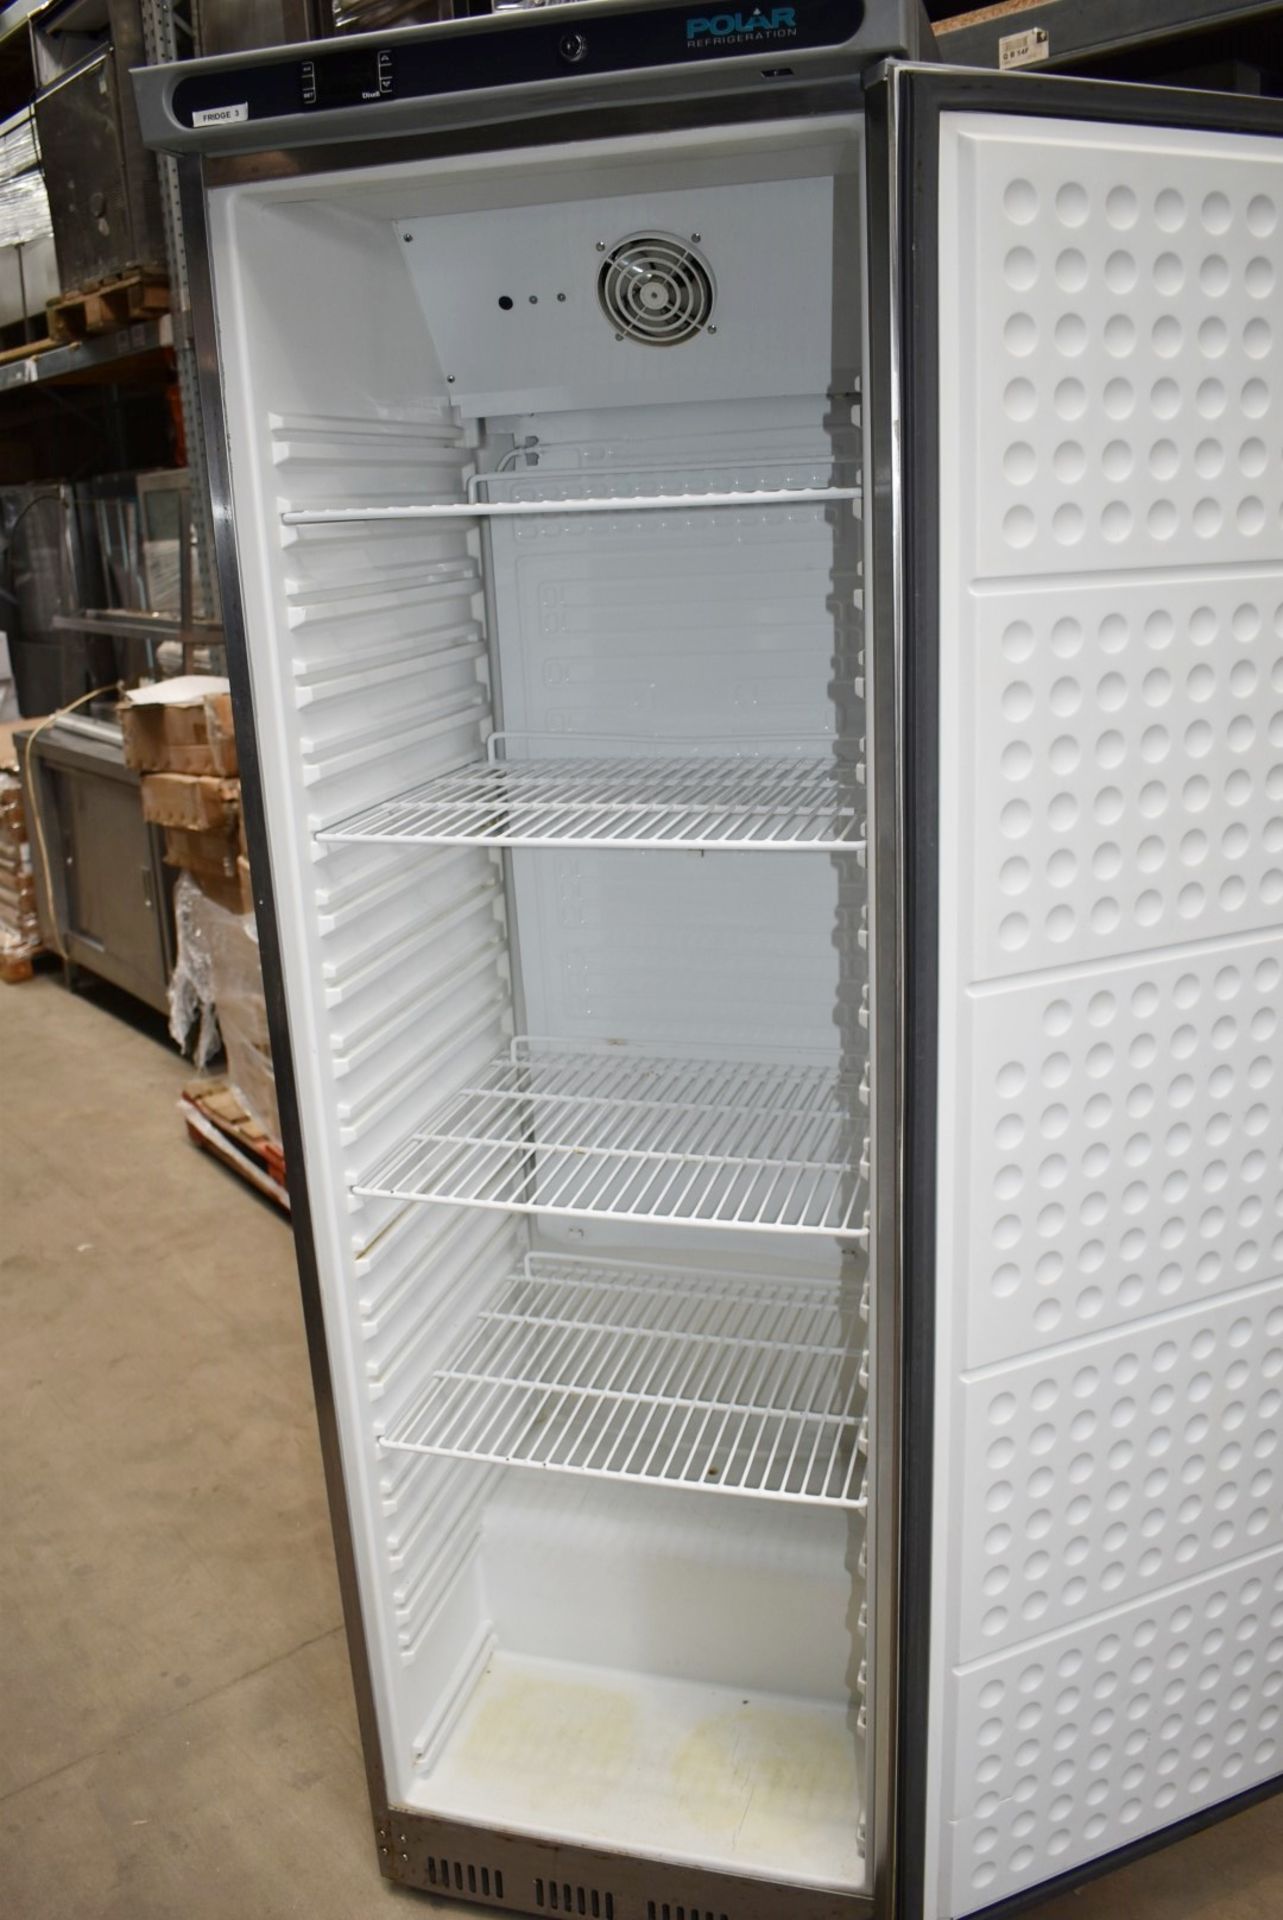 1 x Polar CD082 Upright Refrigerator With Stainless Steel Exterior - Dimensions: H185 x W60 x D60 cm - Image 9 of 12